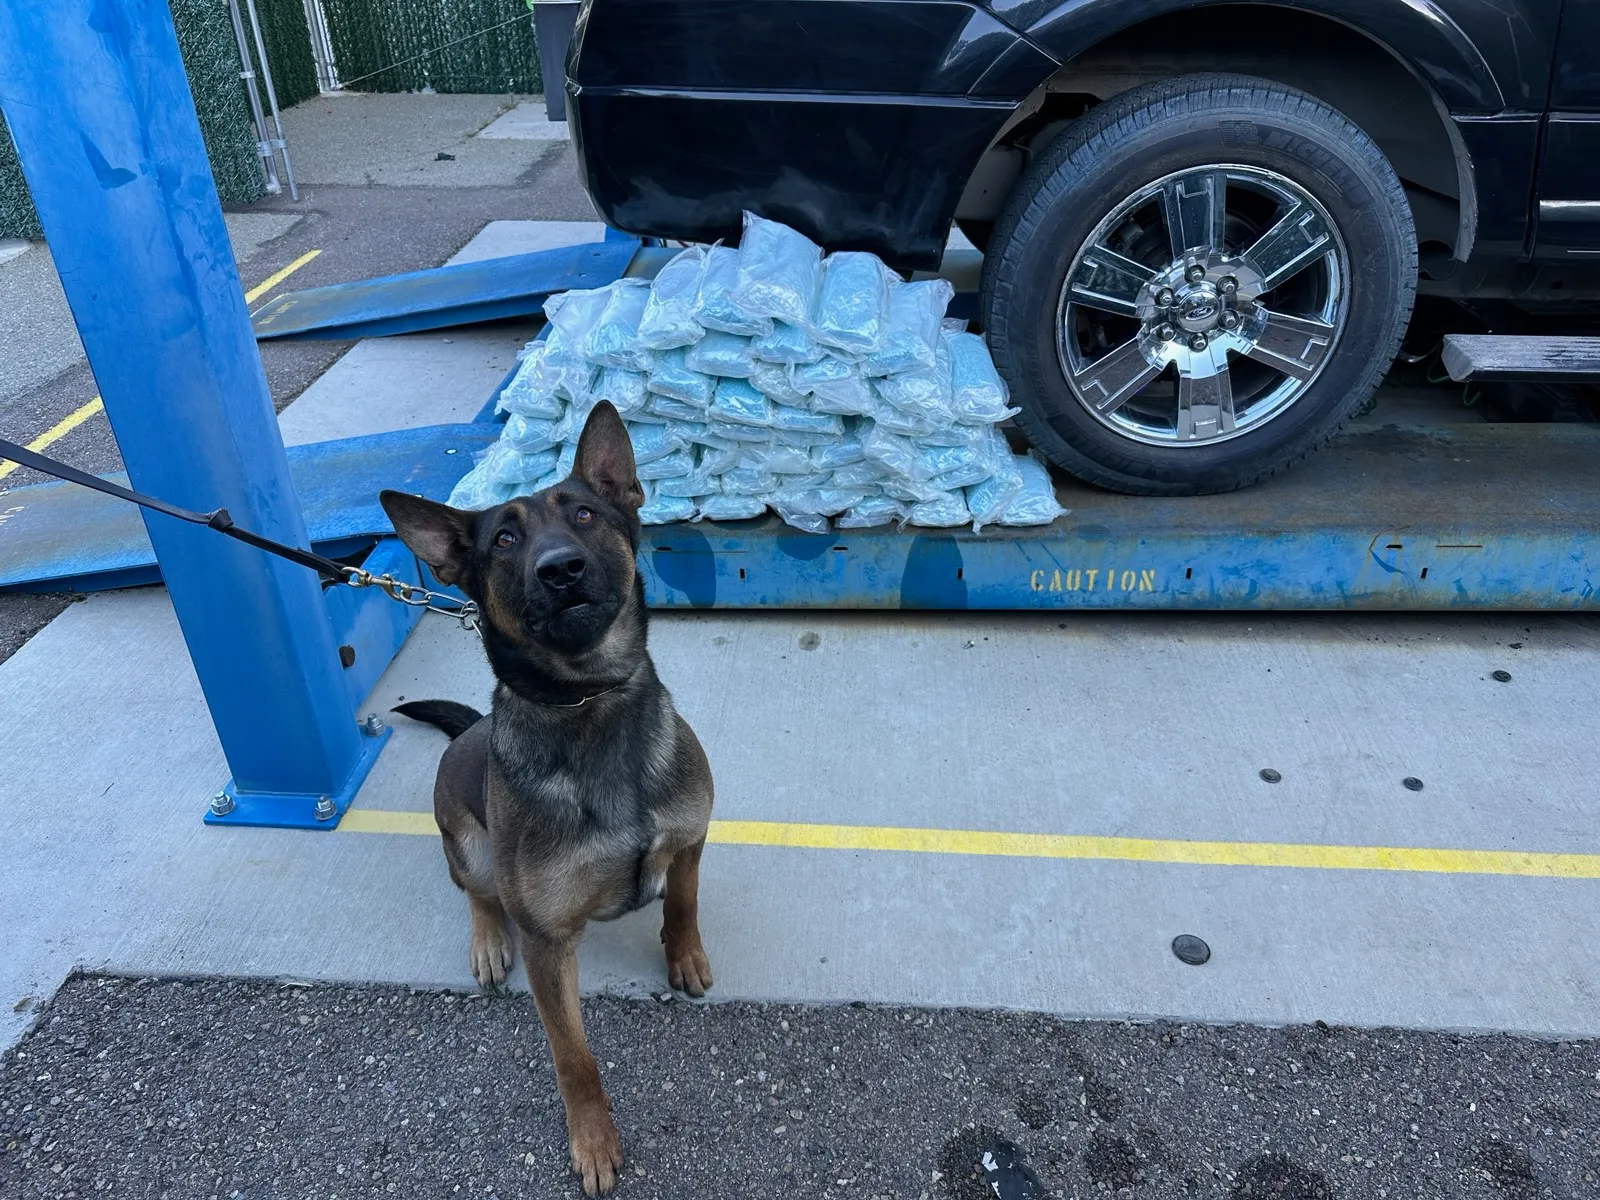 Police dog. The background shows the back end of an SUV with bags of blue pills piled behind the back wheel.